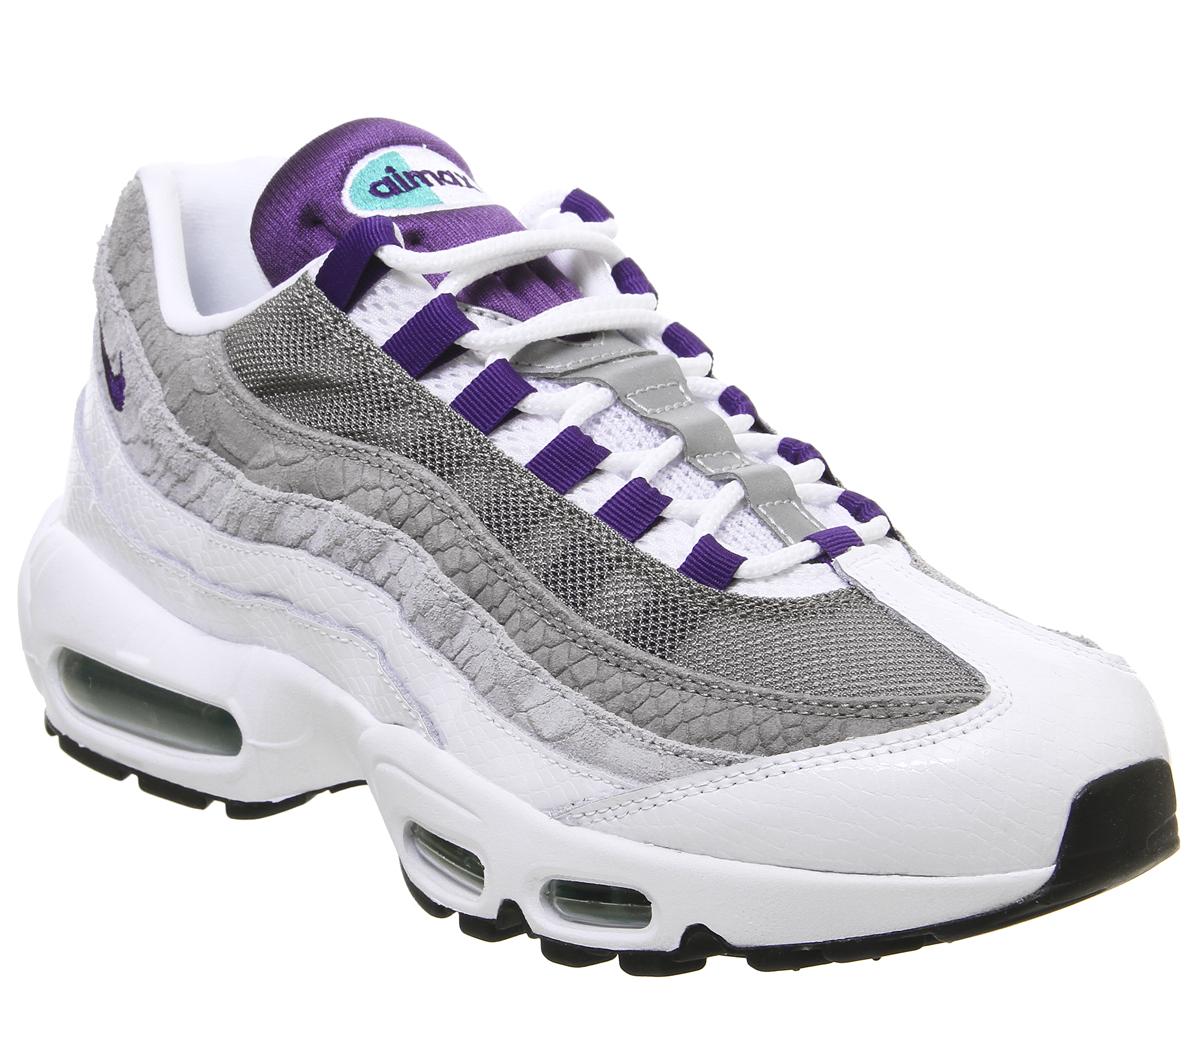 green and purple air max 95